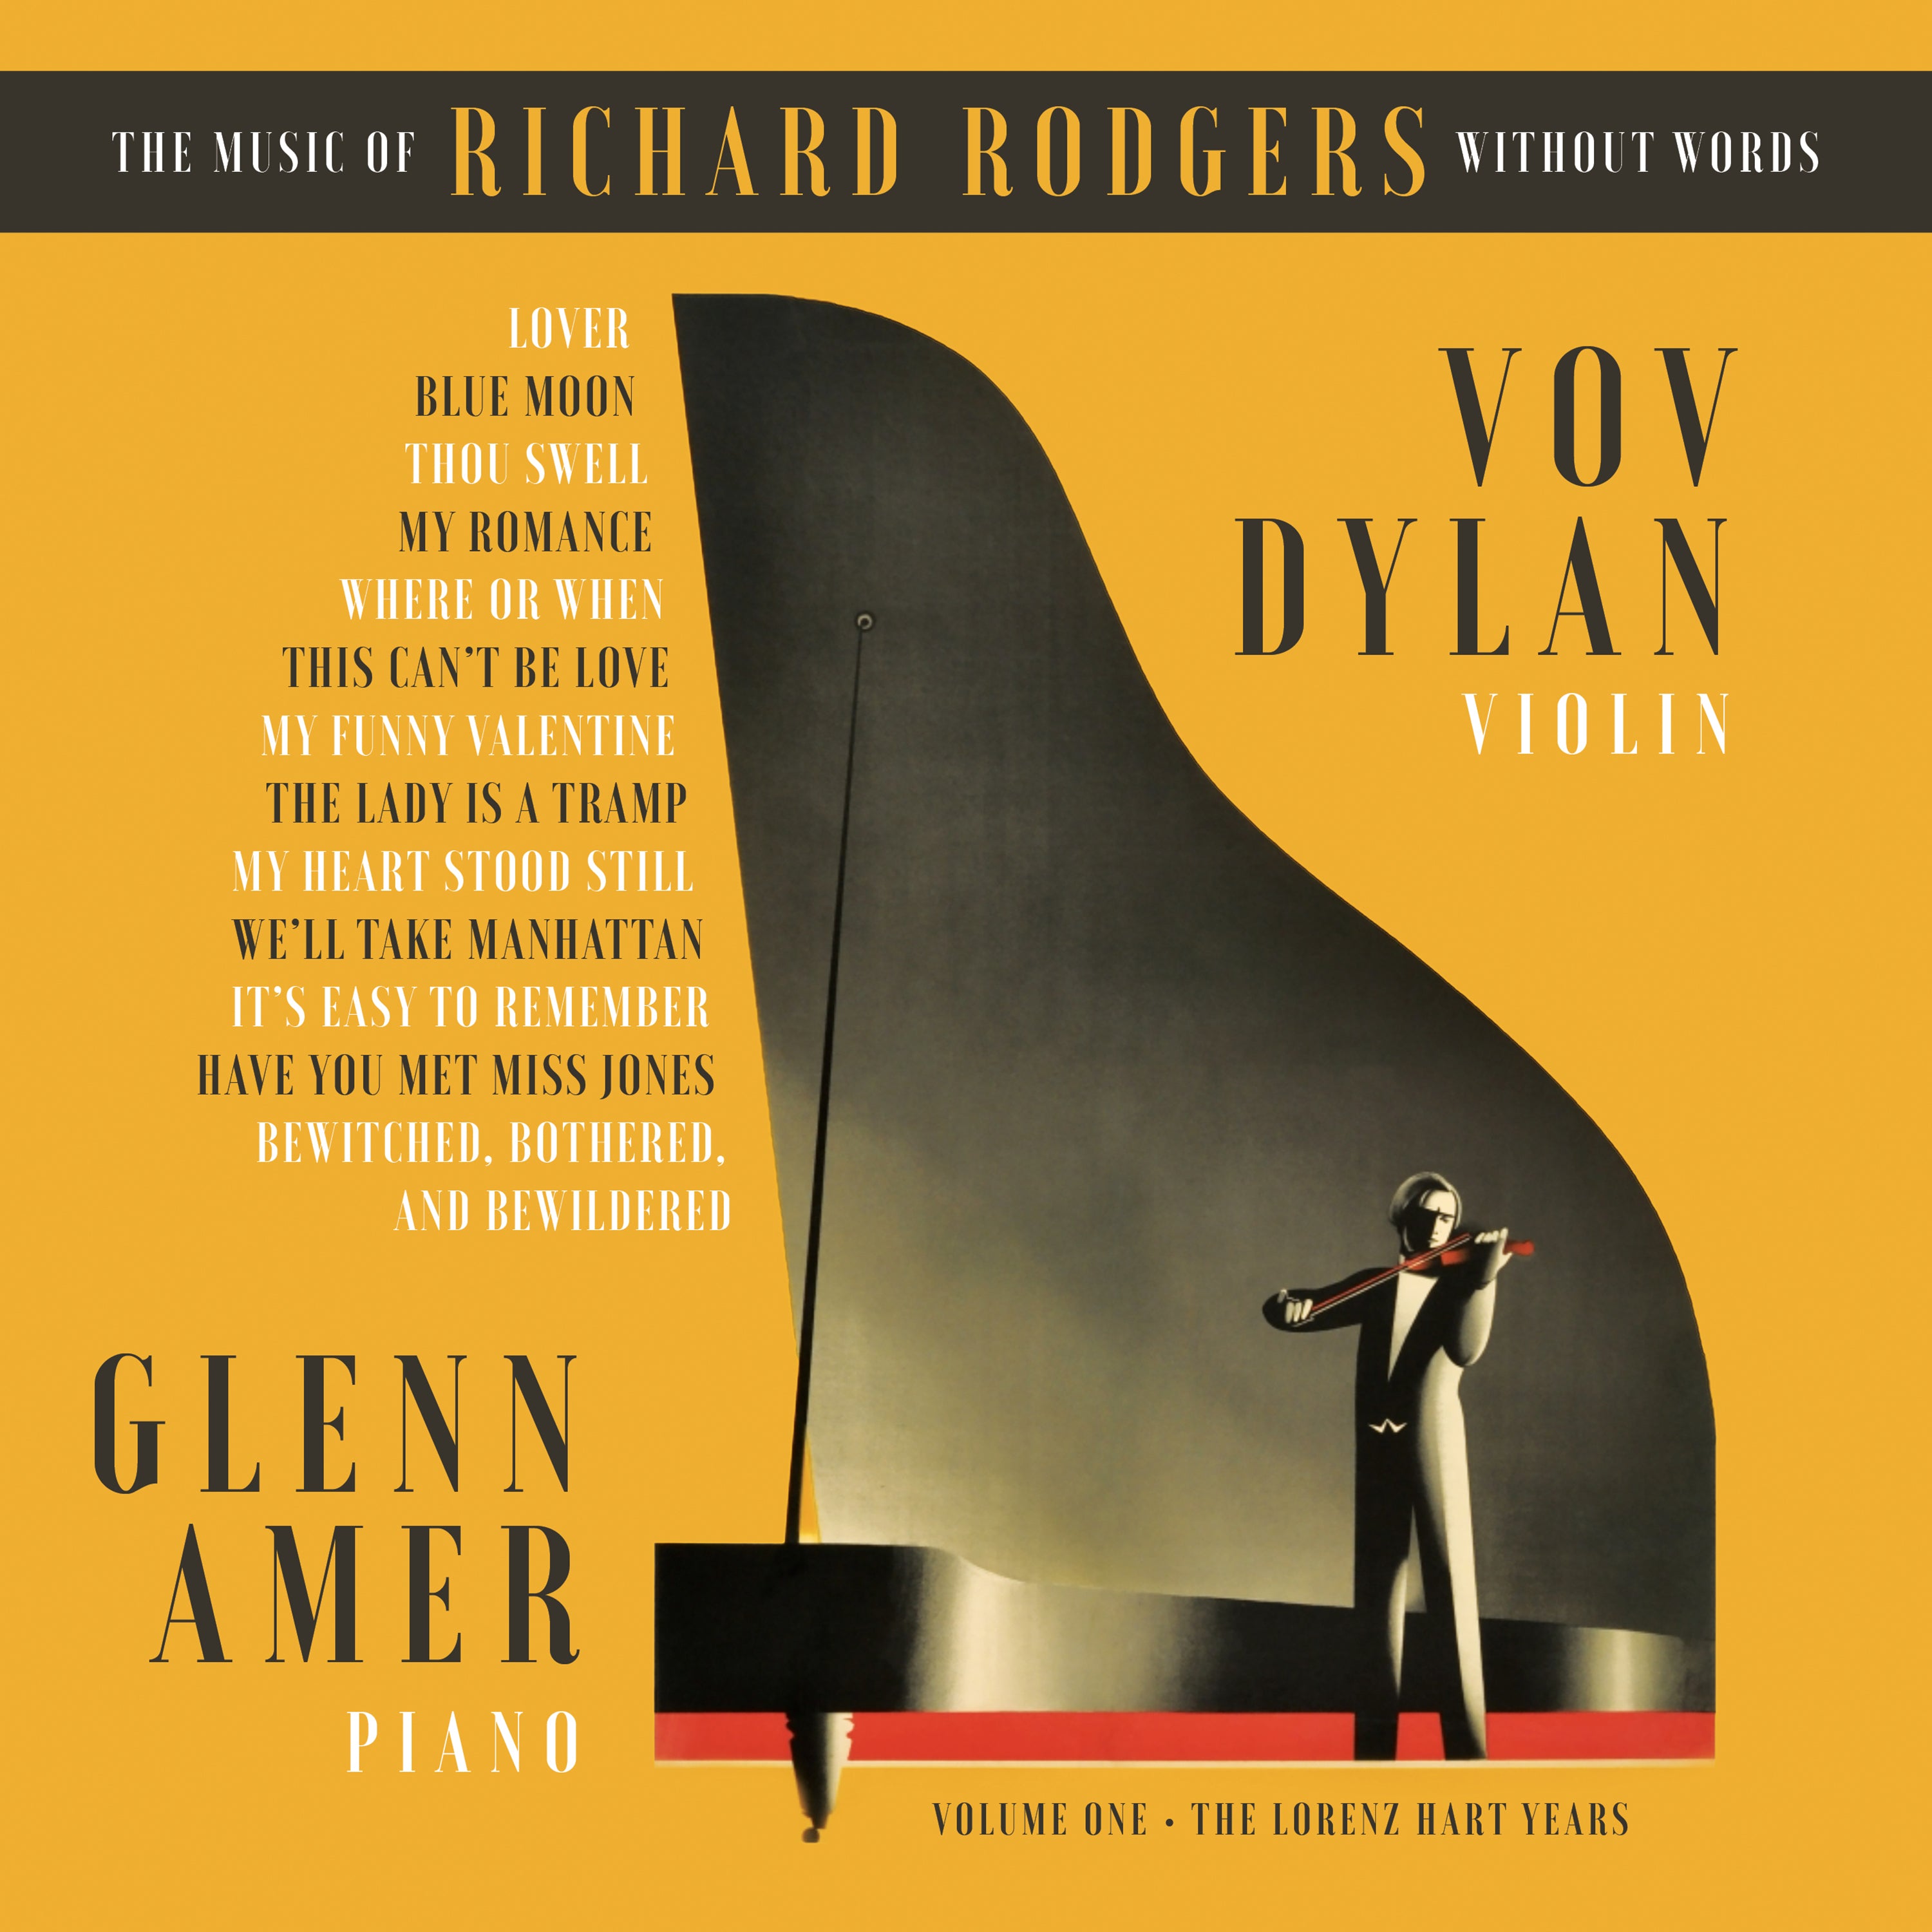 VOV DYLAN & GLENN AMER - THE MUSIC OF RICHARD RODGERS WITHOUT WORDS